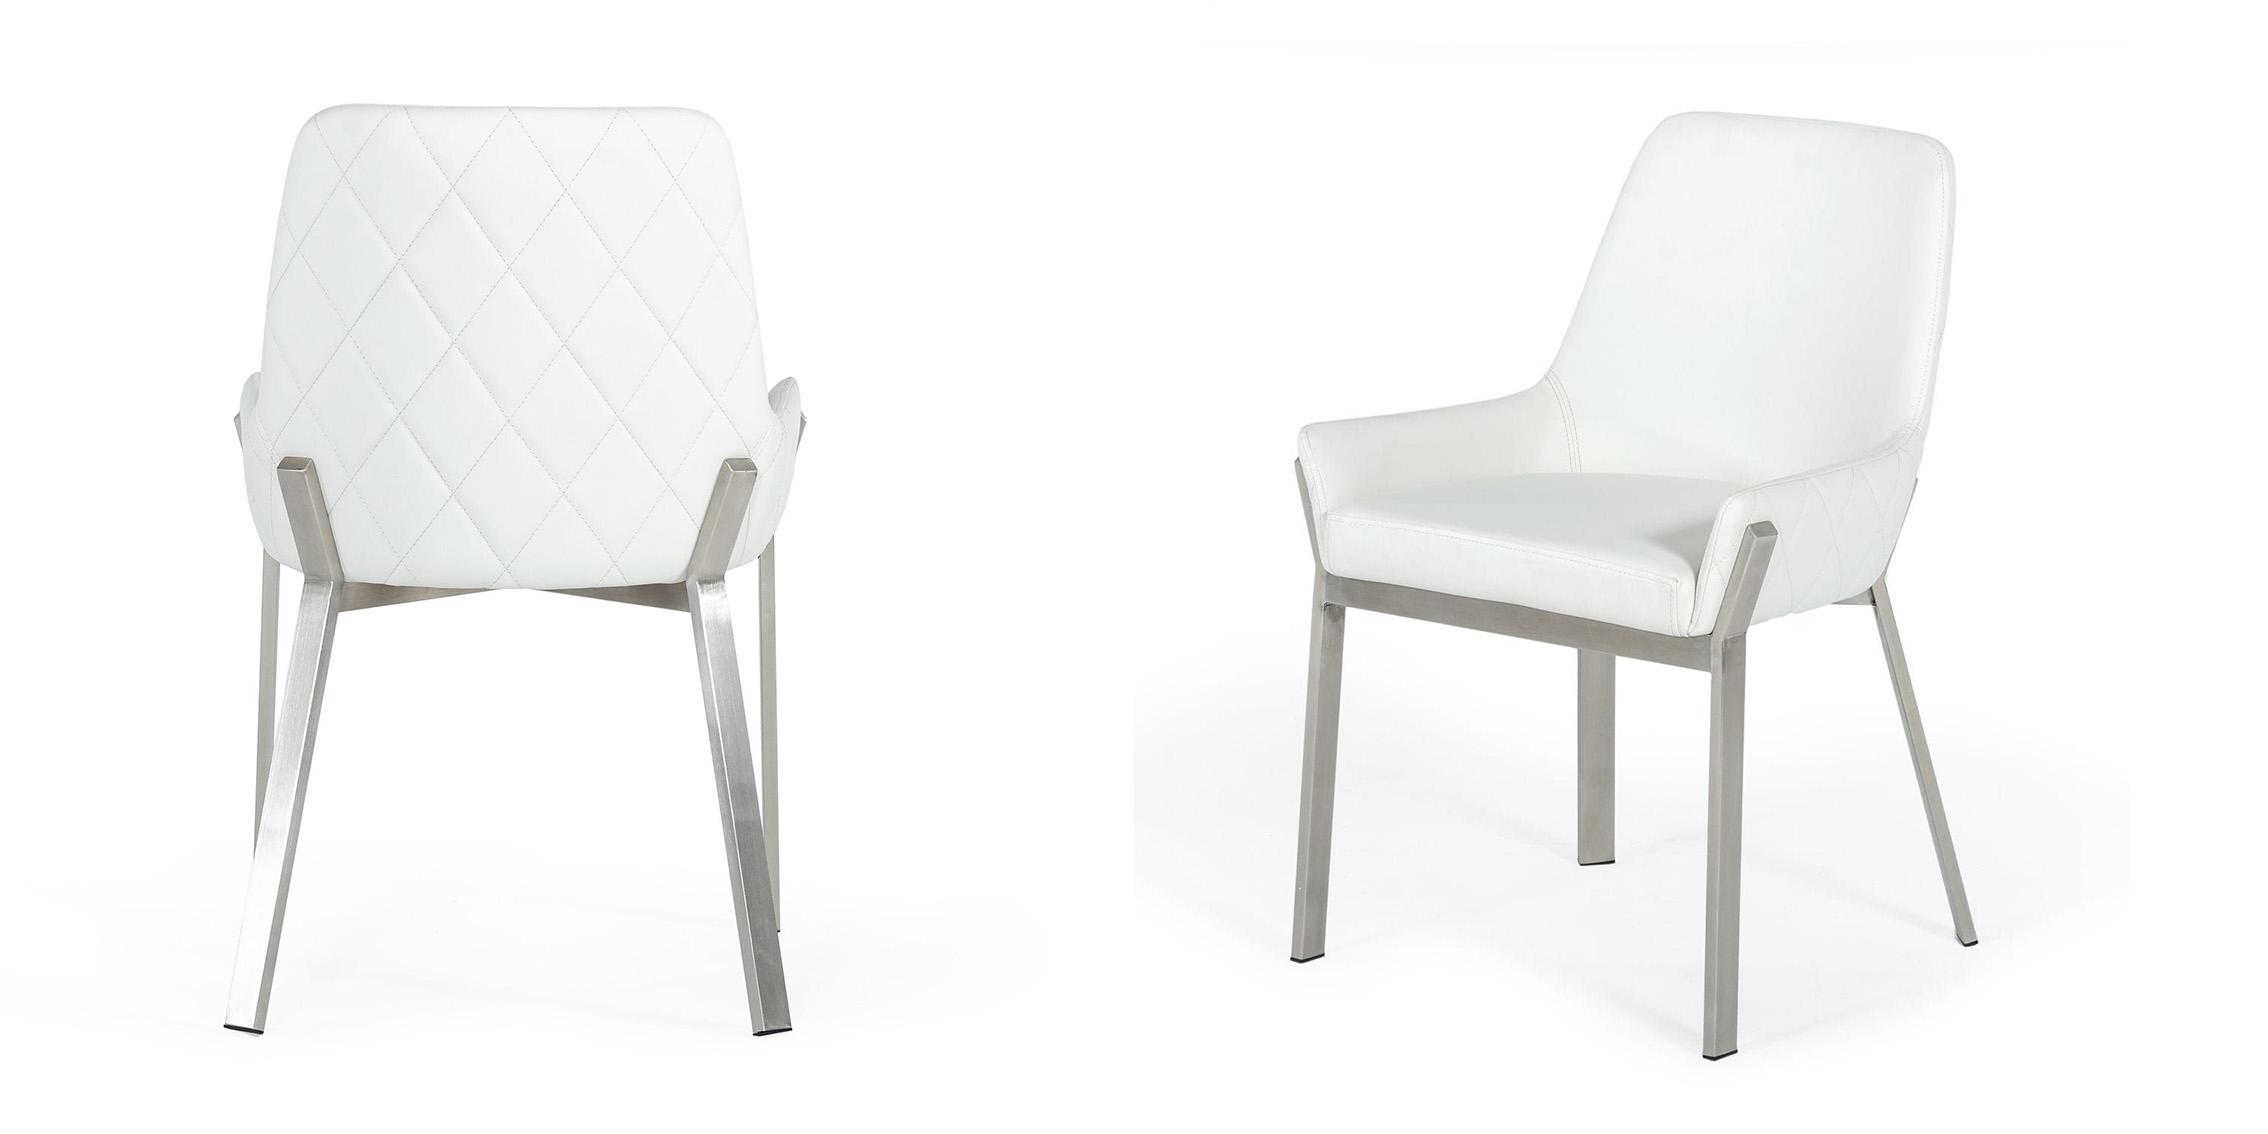 Contemporary, Modern Dining Chair Set VGGAGA-6736CH-WHT-SS-DC-Set-2 VGGAGA-6736CH-WHT-SS-DC-Set-2 in Chrome, White Leatherette